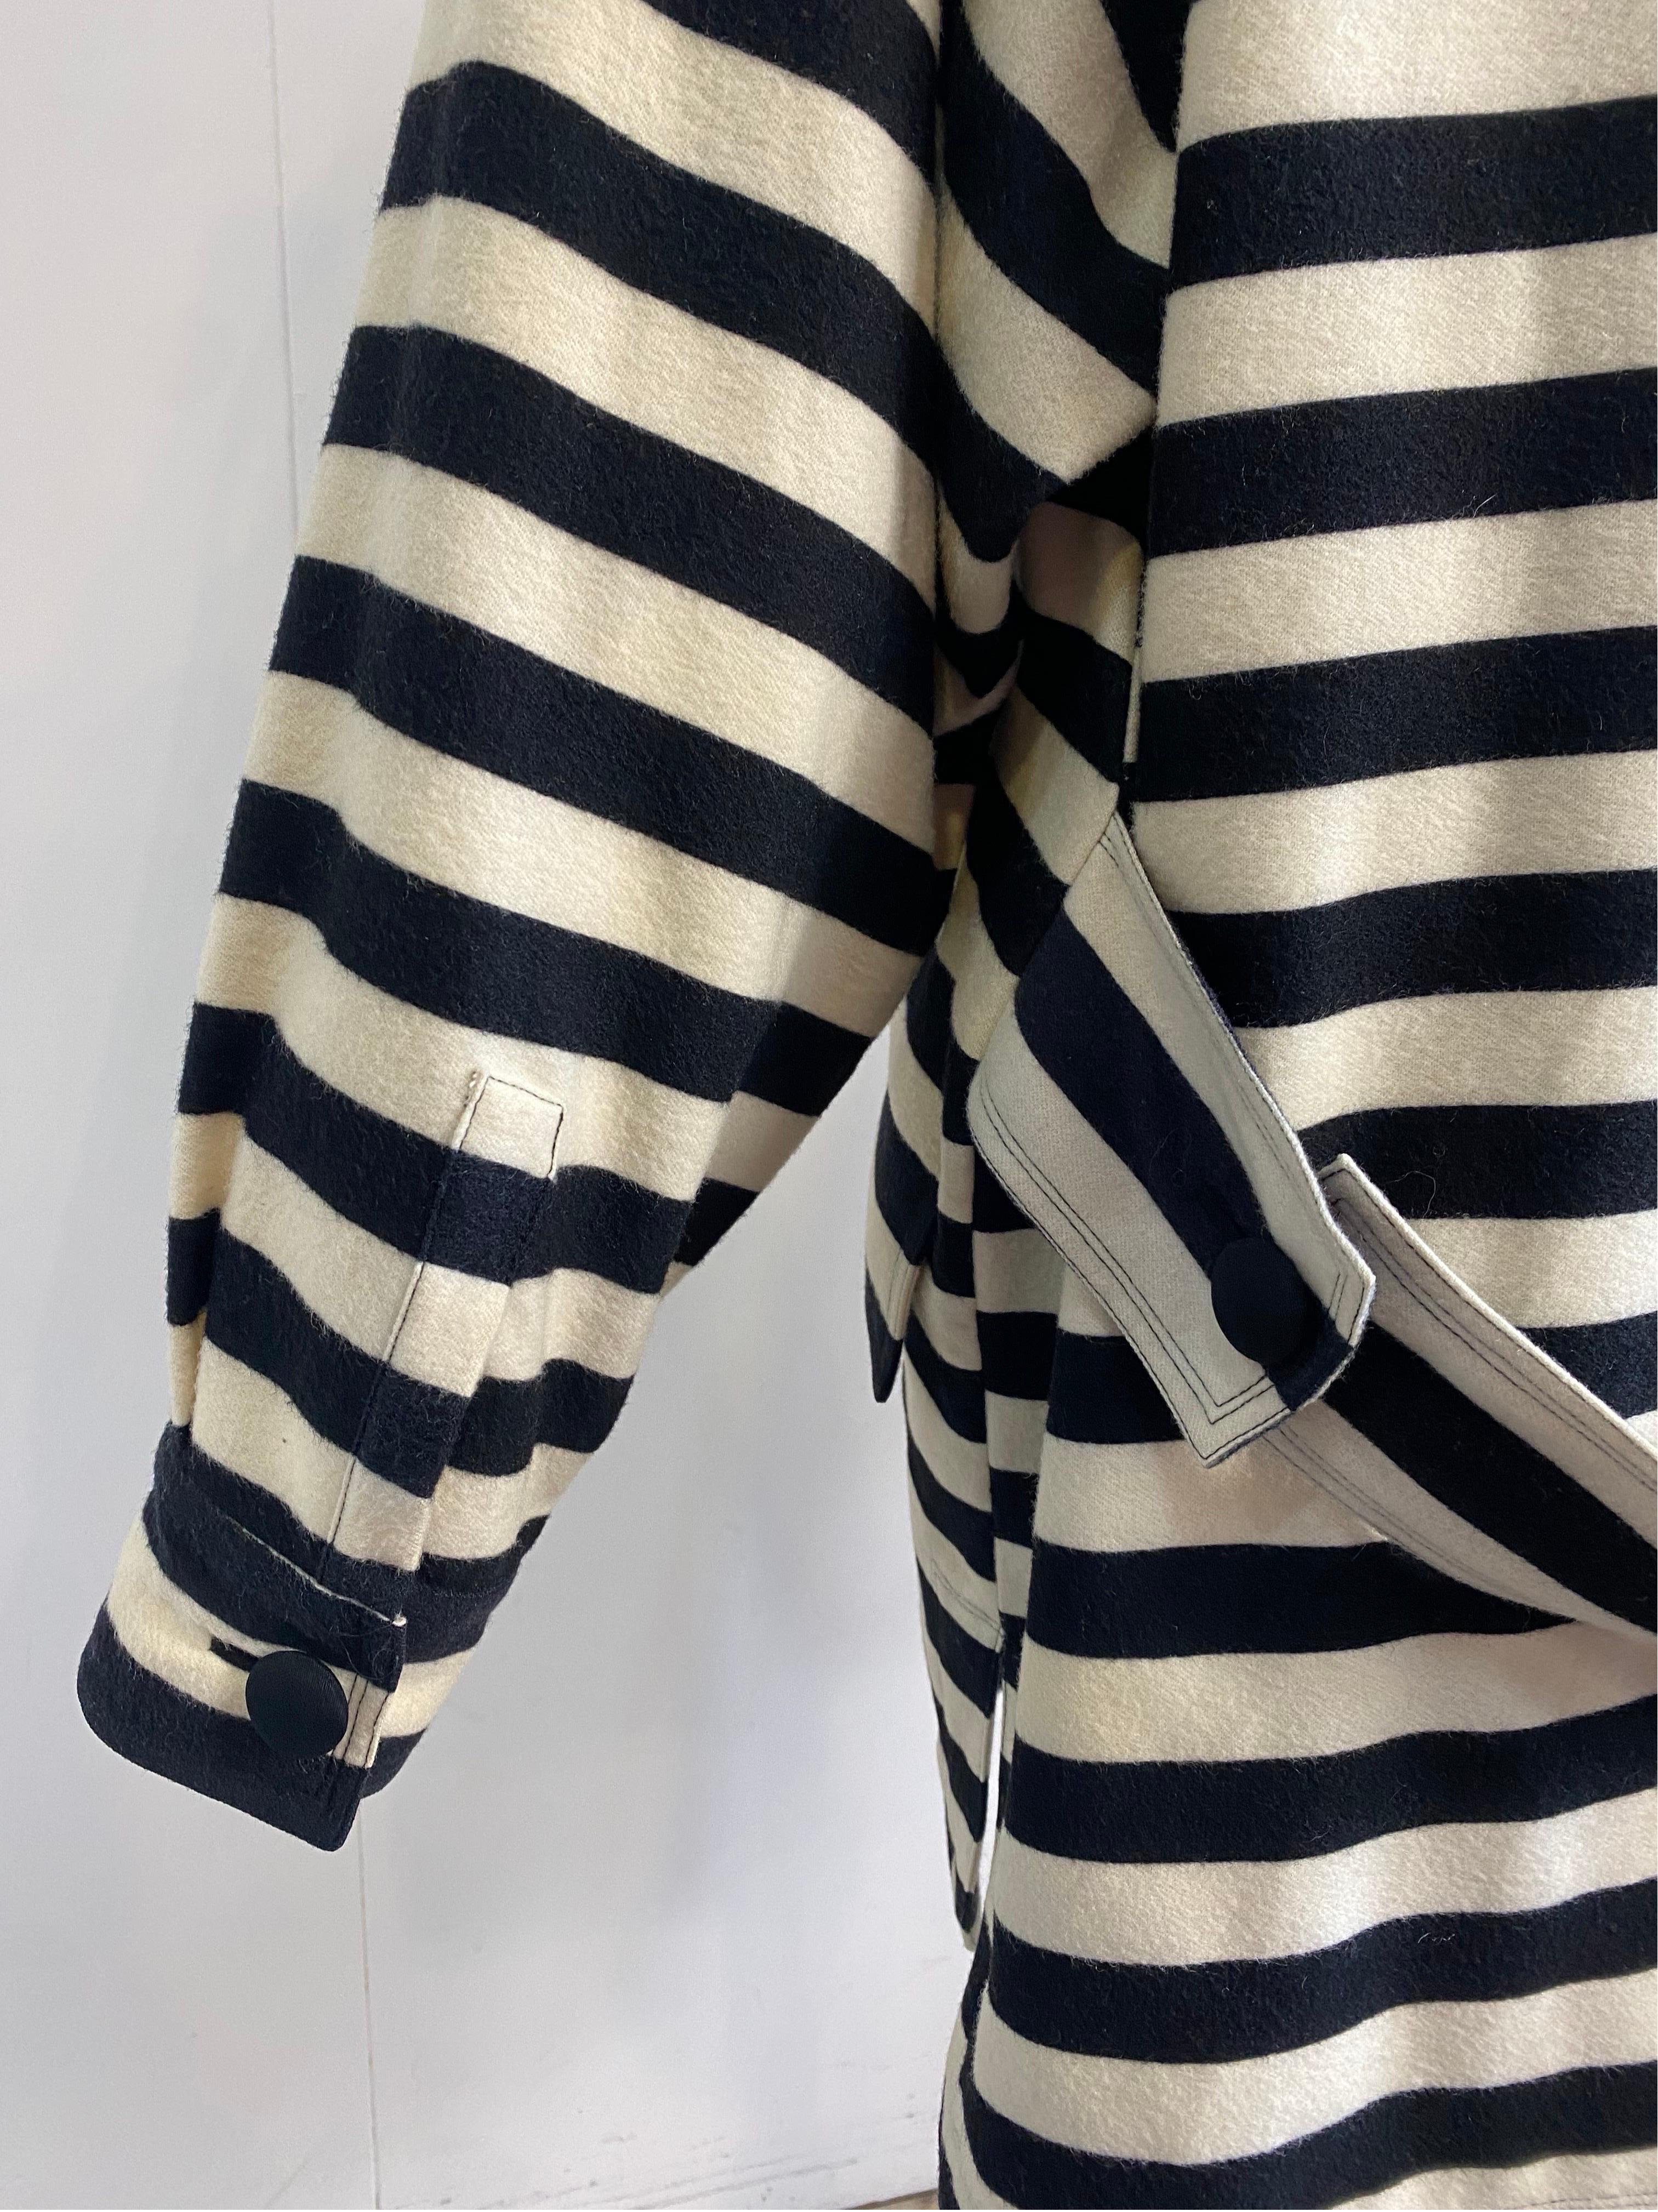 Gianni Versace 90s vintage striped Jacket For Sale 1